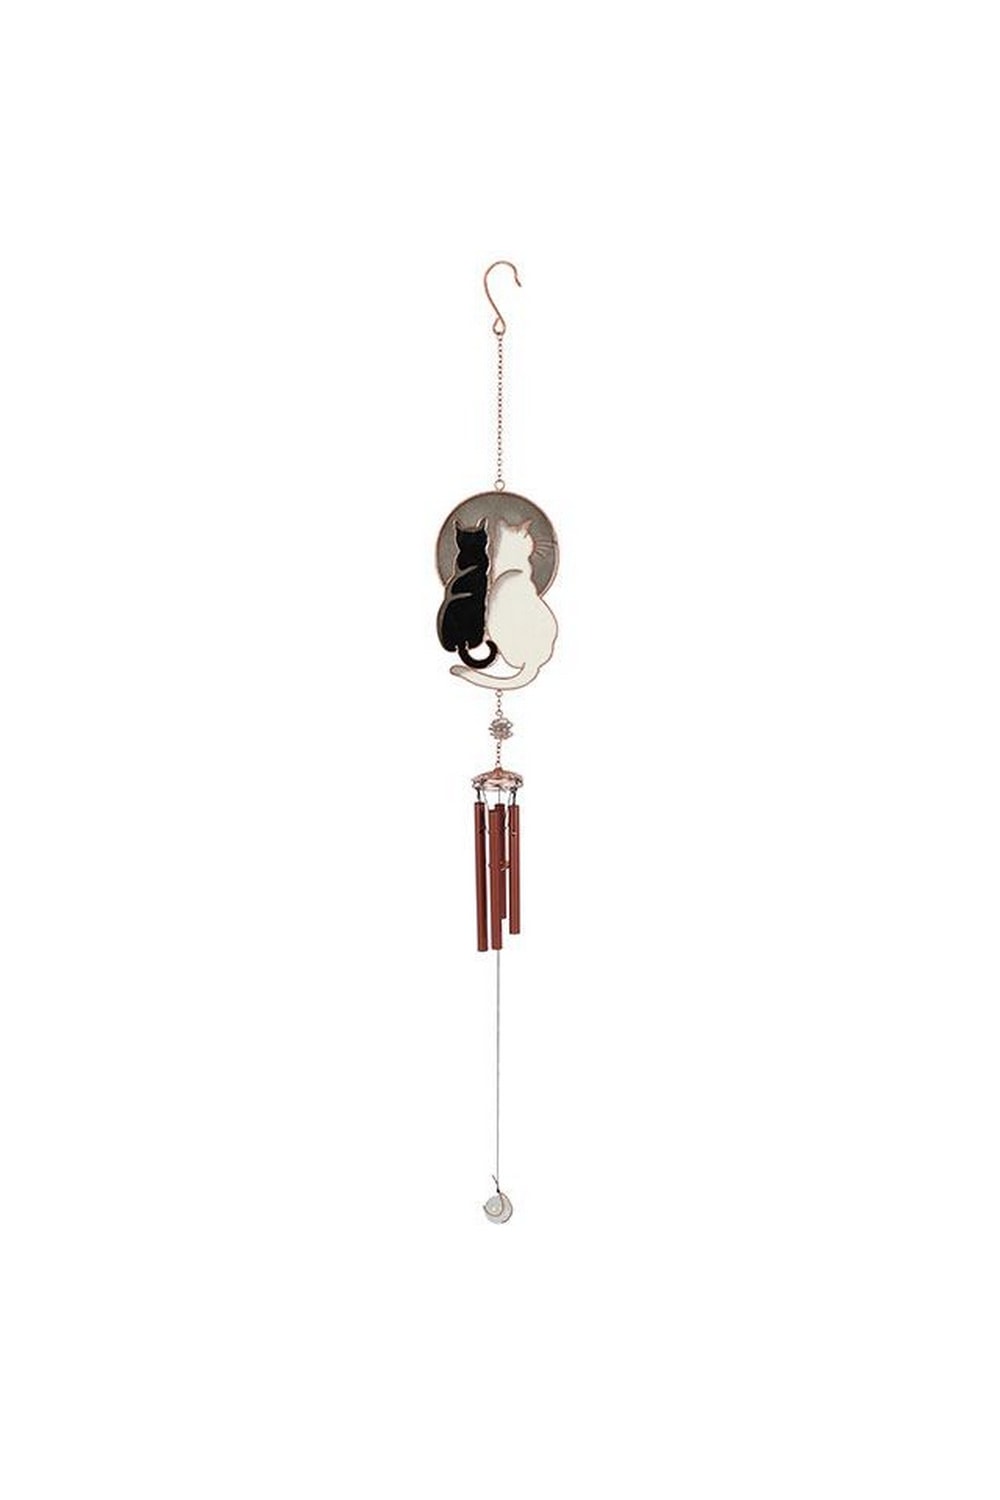 Something Different Gazing Cats Wind Chime (One Size)